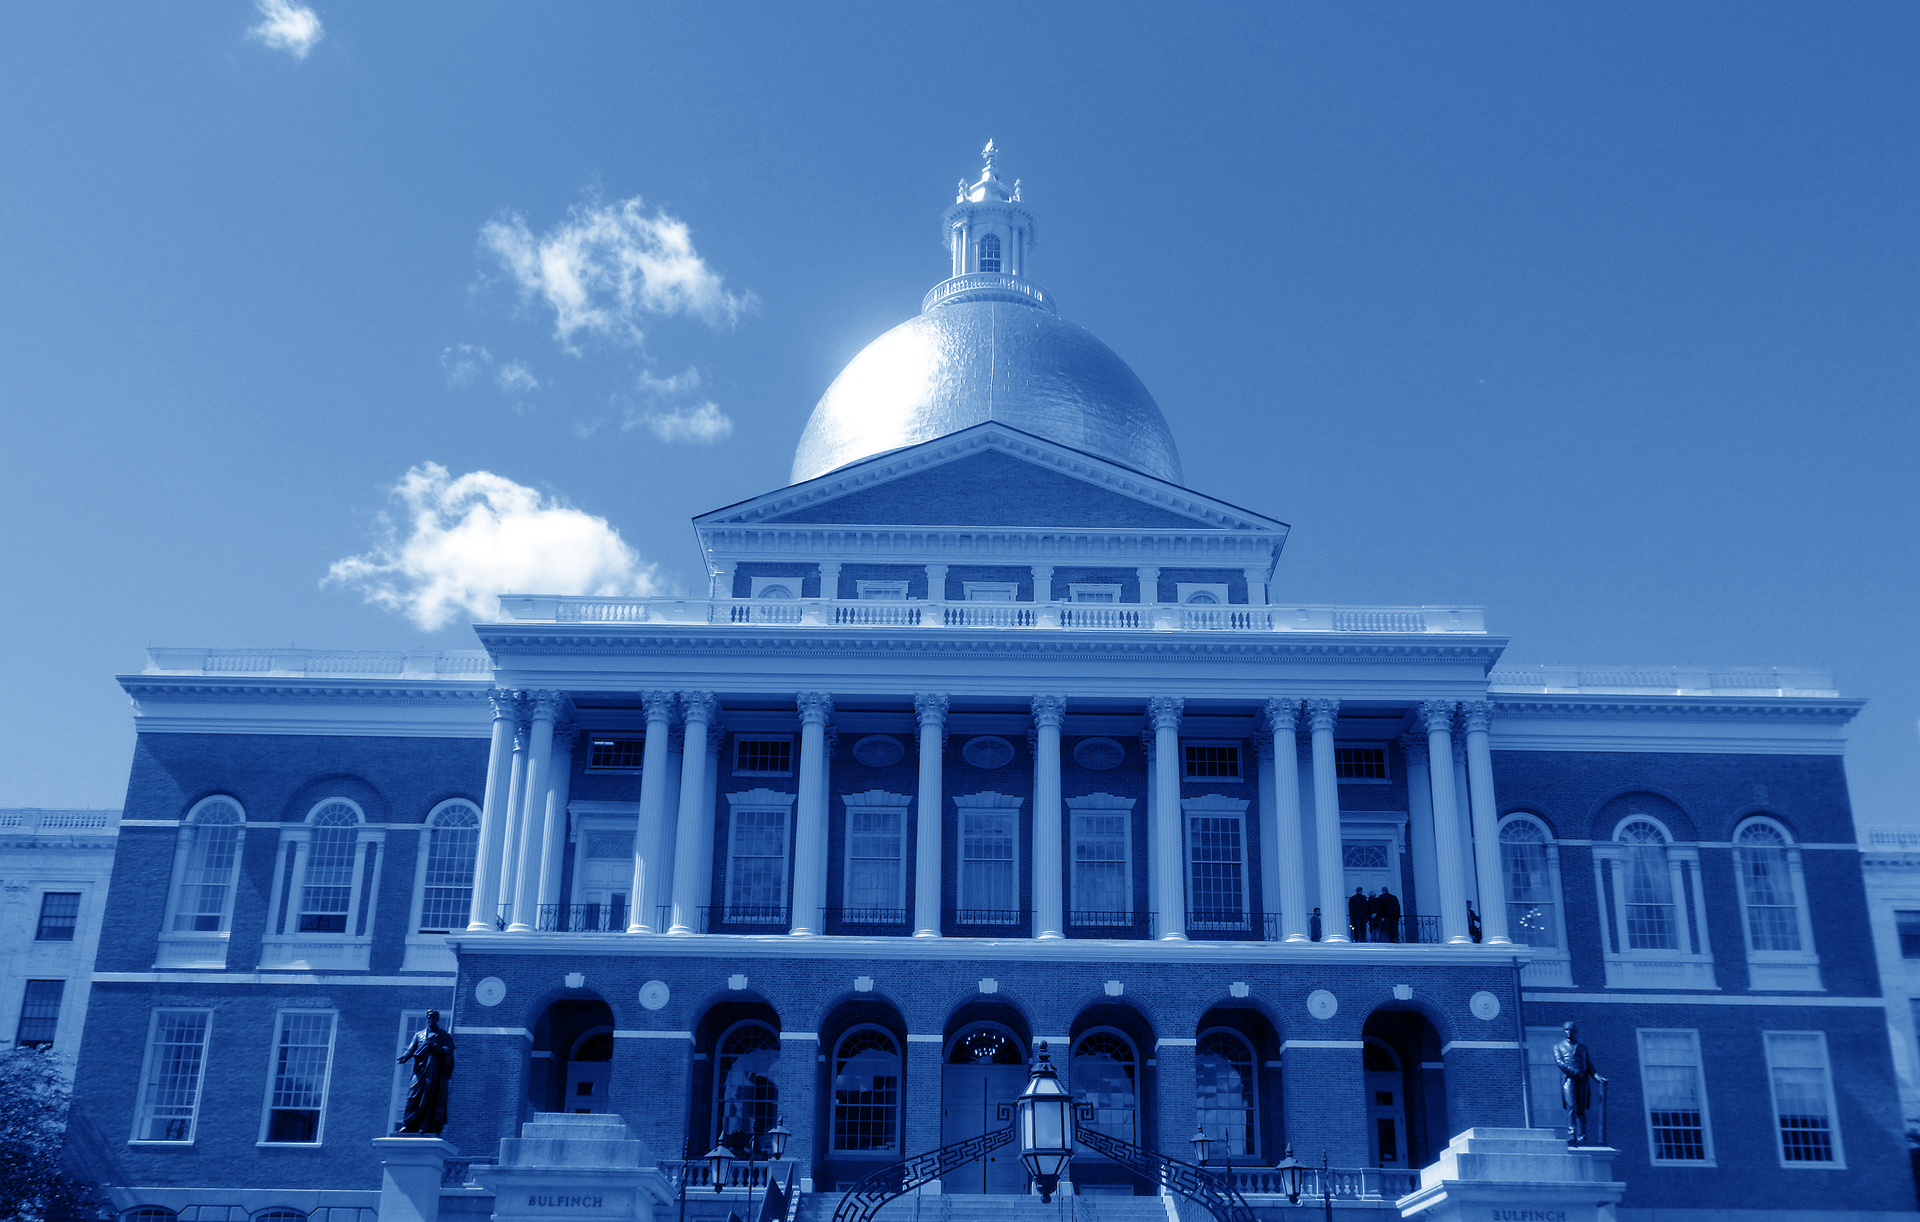 Blue tone photograph of the Massachusetts State House